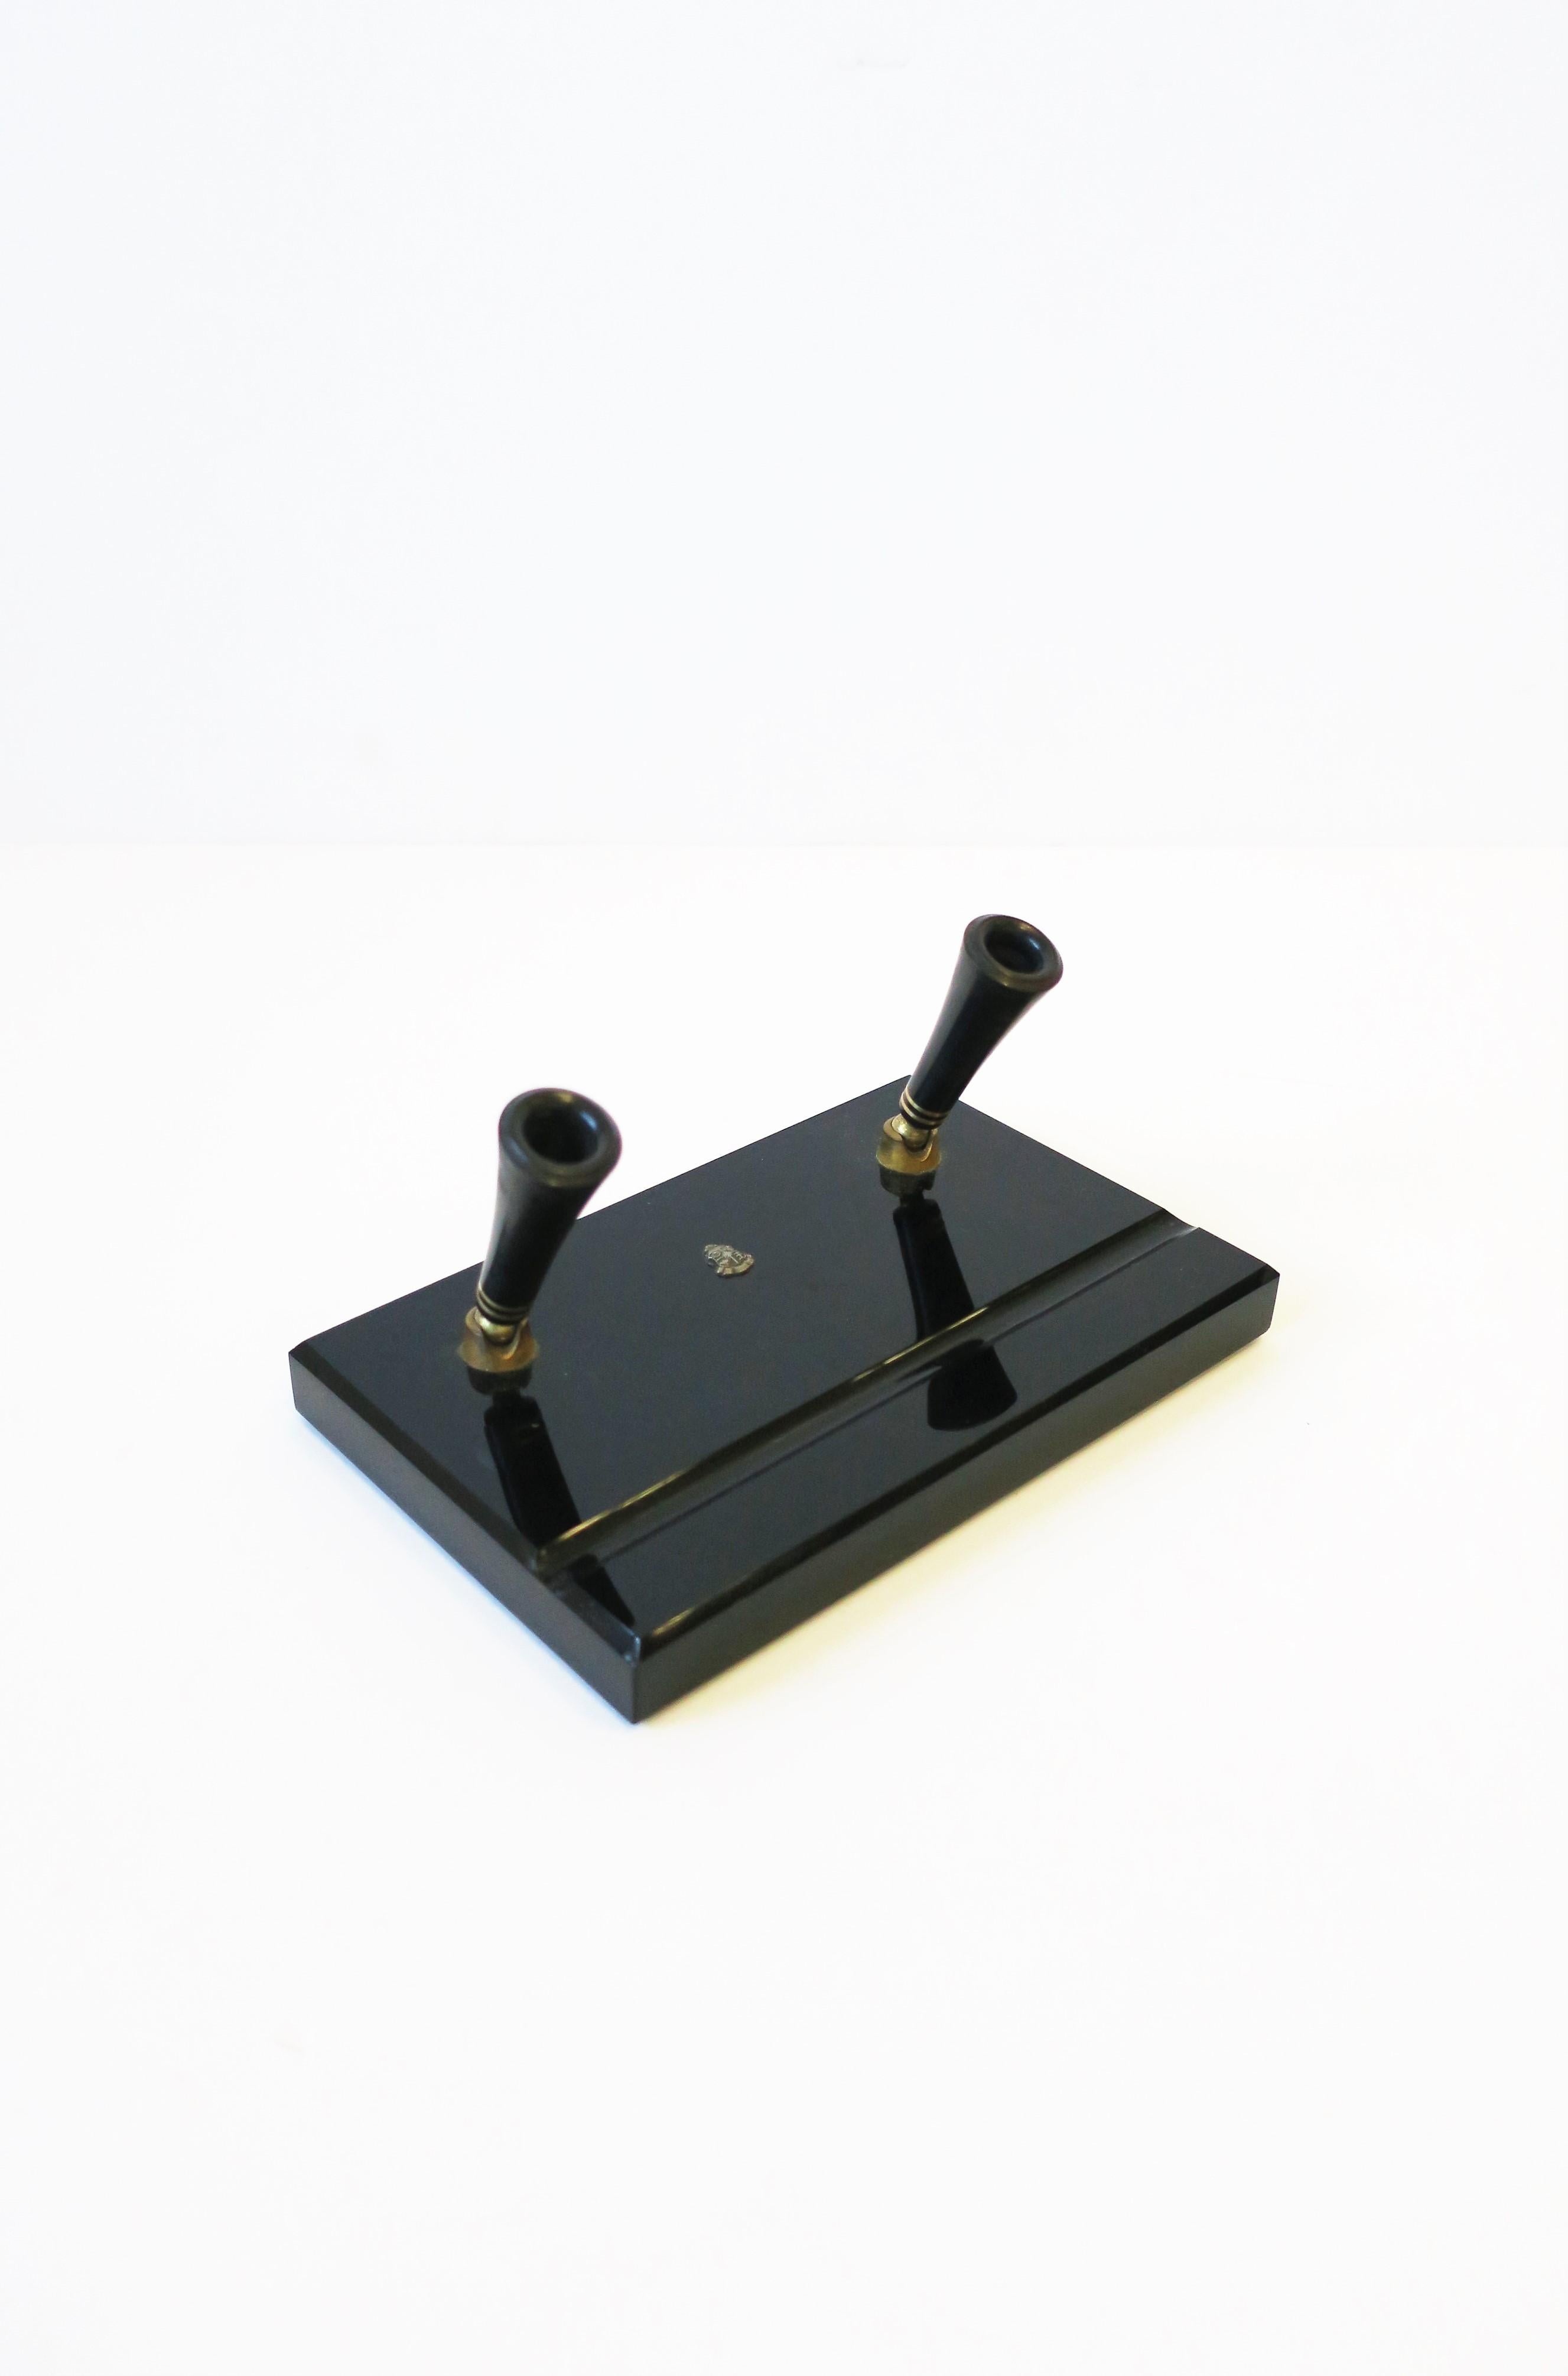 An Art Deco period black glass and brass desk pen holder with crest, circa 20th century. Piece holds standard size pen. Crest at front center is a scull w/cross-bones. 

Other items in images also available, search 1stdibs ID#s: 
Malachite Dish